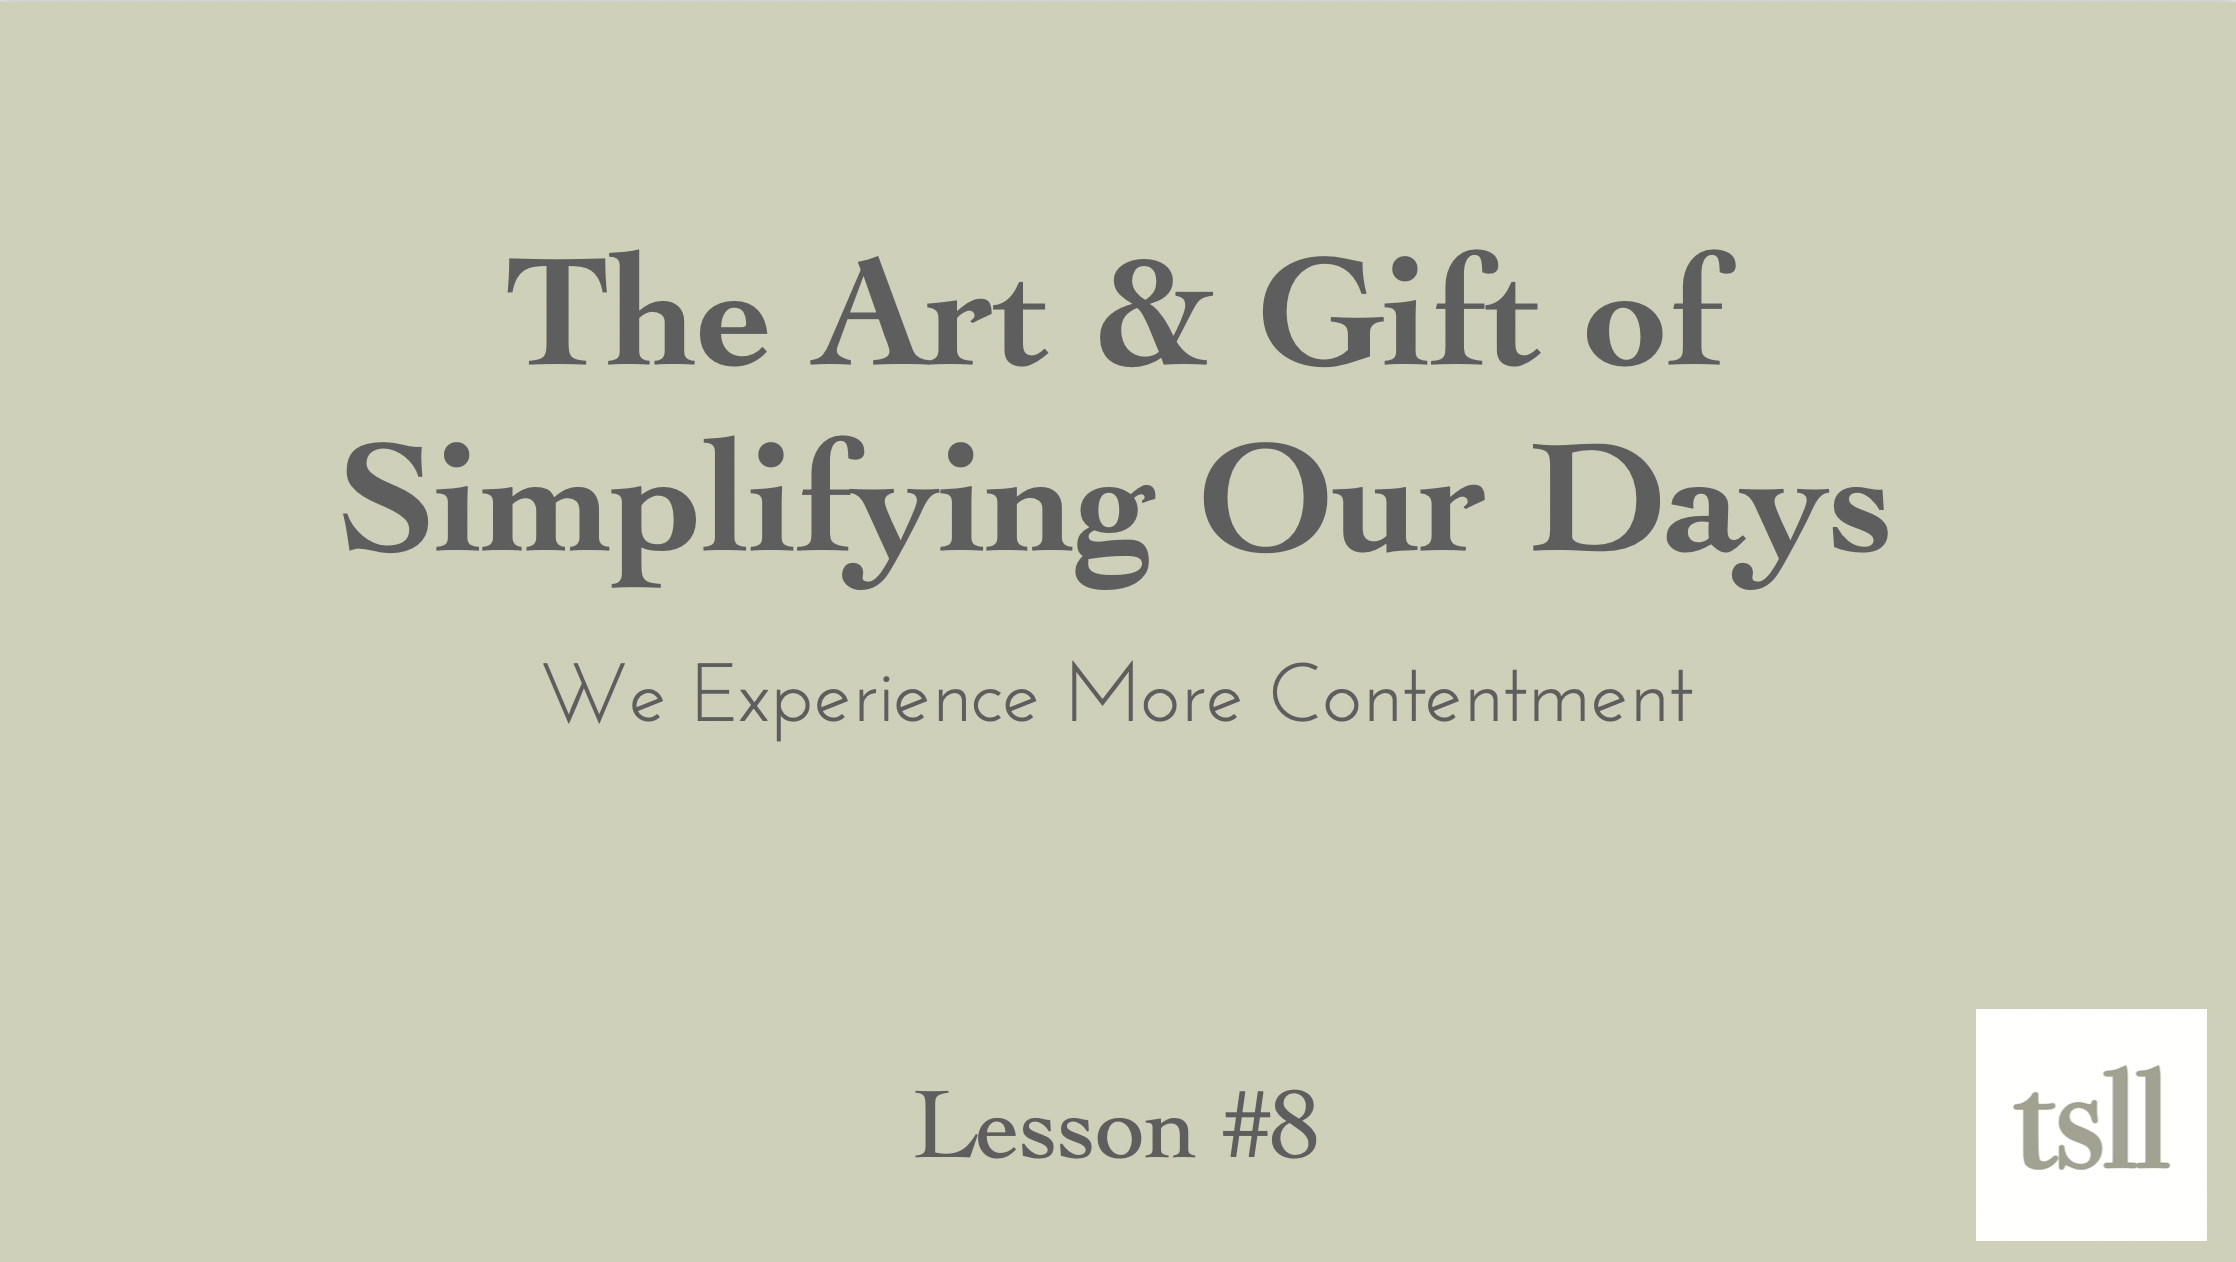 Part 3: The Art & Gift of Simplifying Our Days: More Contentment, (19:16)